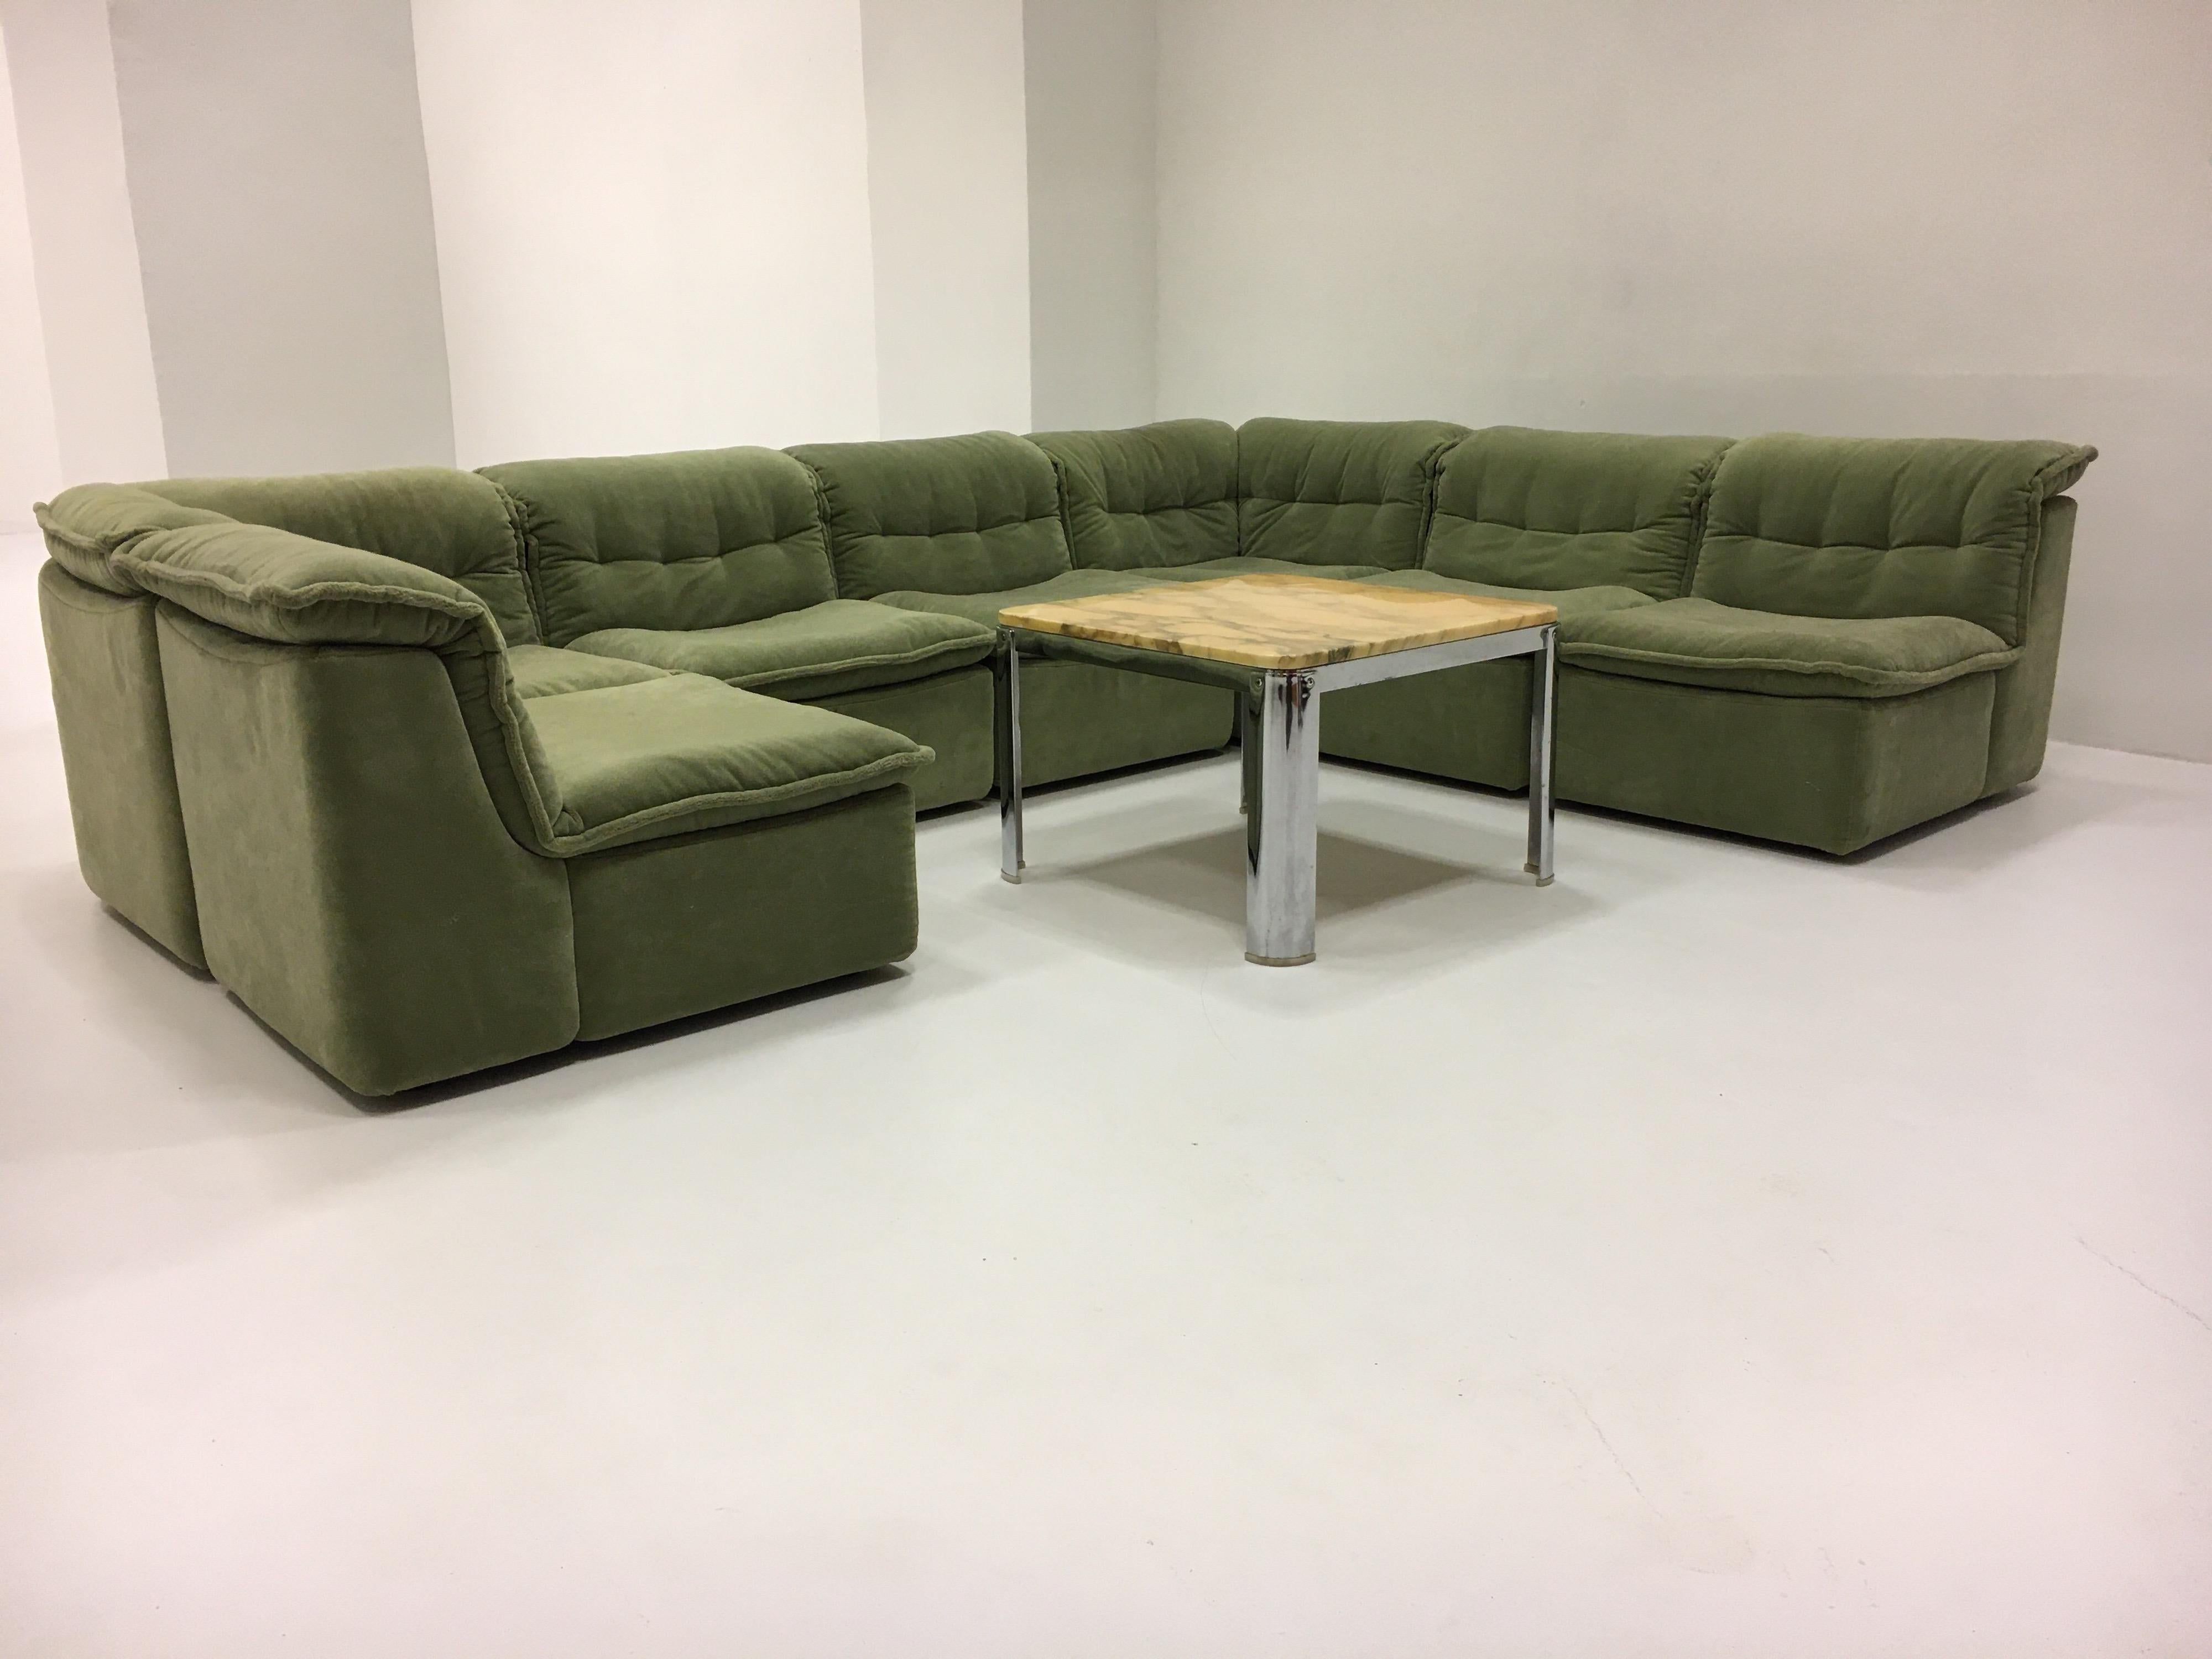 Fabric Vintage Rolf Benz Modular Sectional Sofa Suite, Germany, 1970